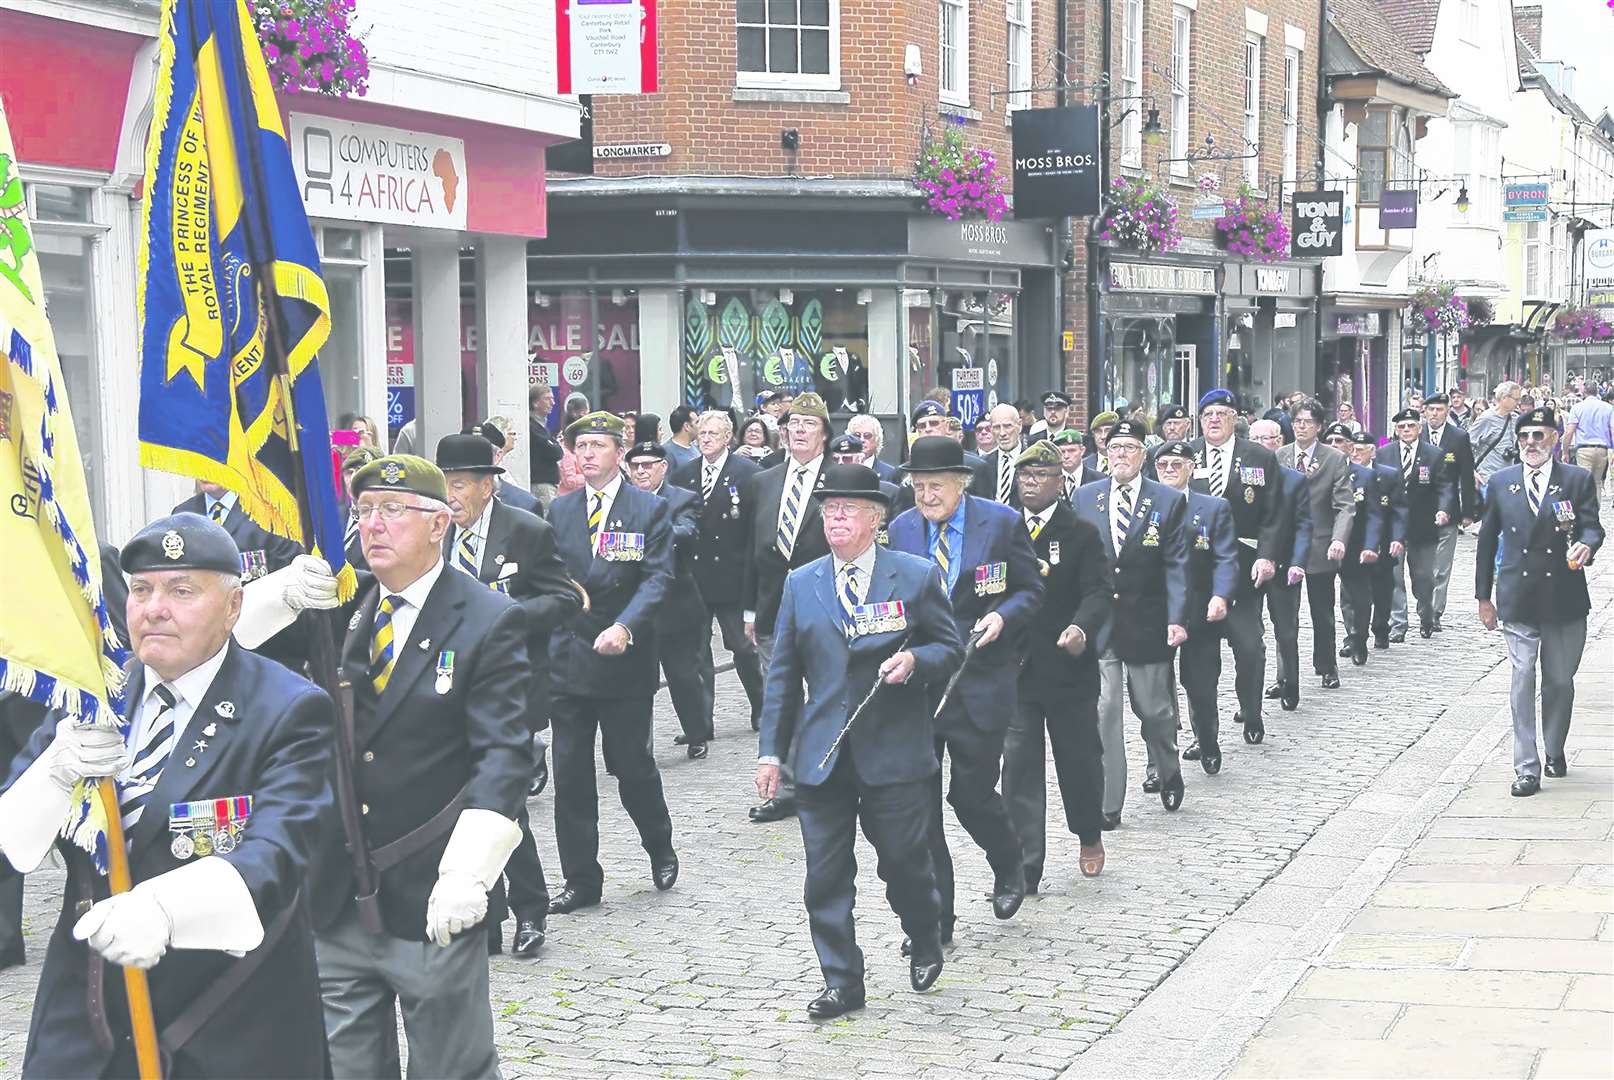 Veterans of the Queen's Own Buffs Regimental Association march along Burgate on Sunday. Picture: Barry Duffield FM4862956 (11782995)